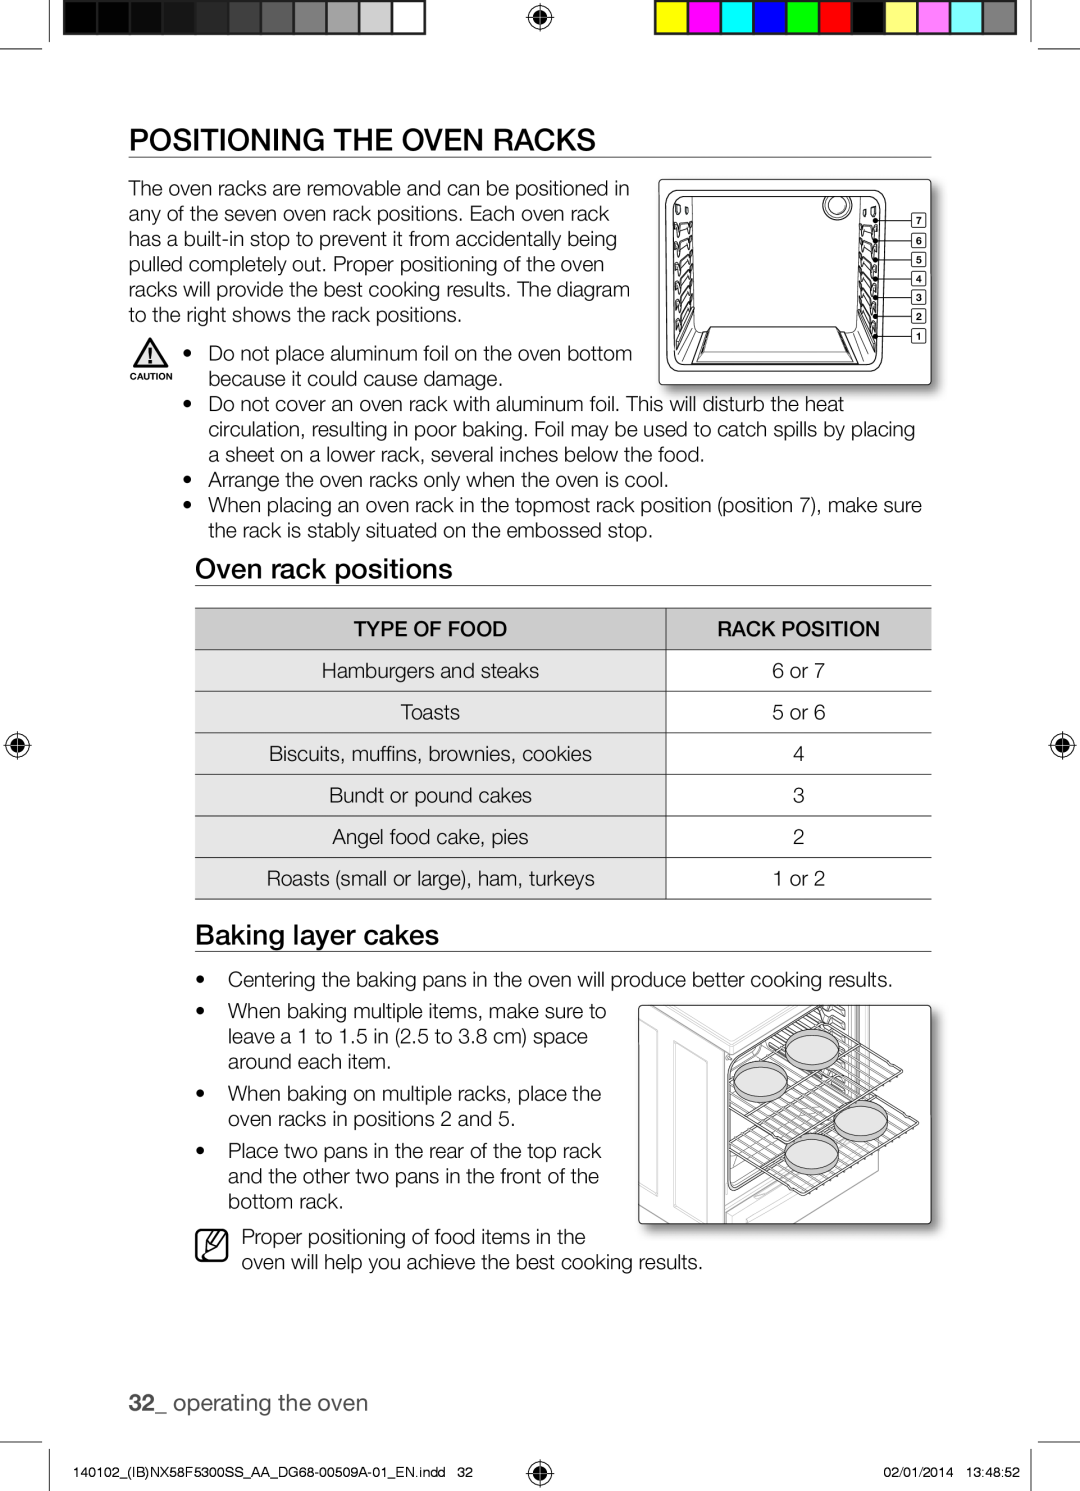 Samsung NX58F5500SW user manual Positioning The Oven Racks, Oven rack positions, Baking layer cakes, operating the oven 